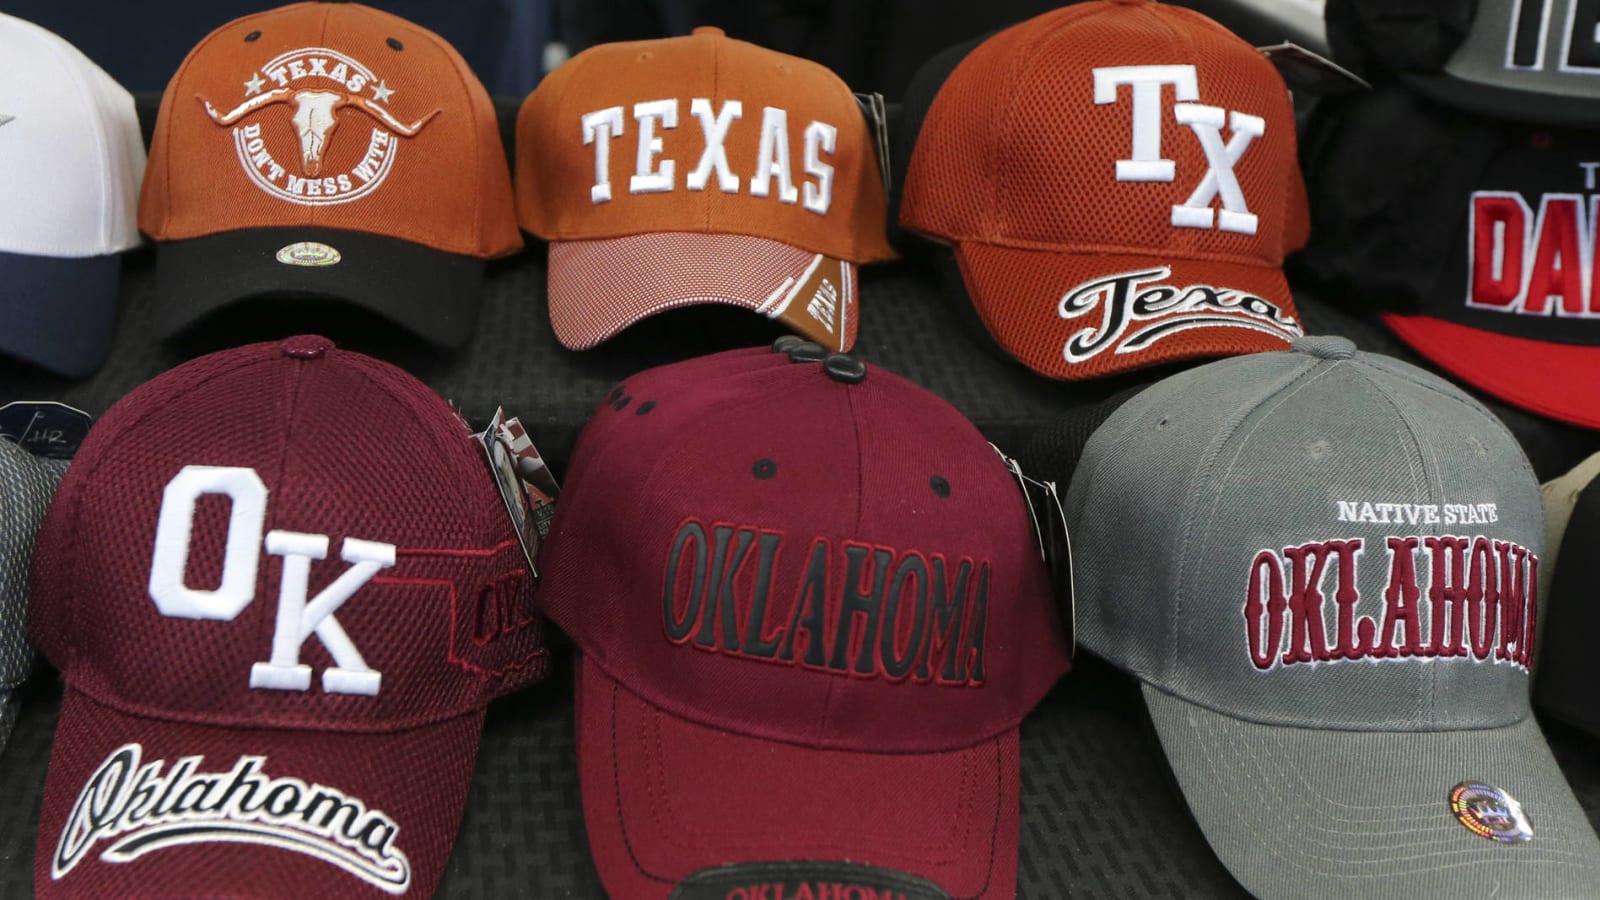 Report: Texas, Oklahoma could join SEC